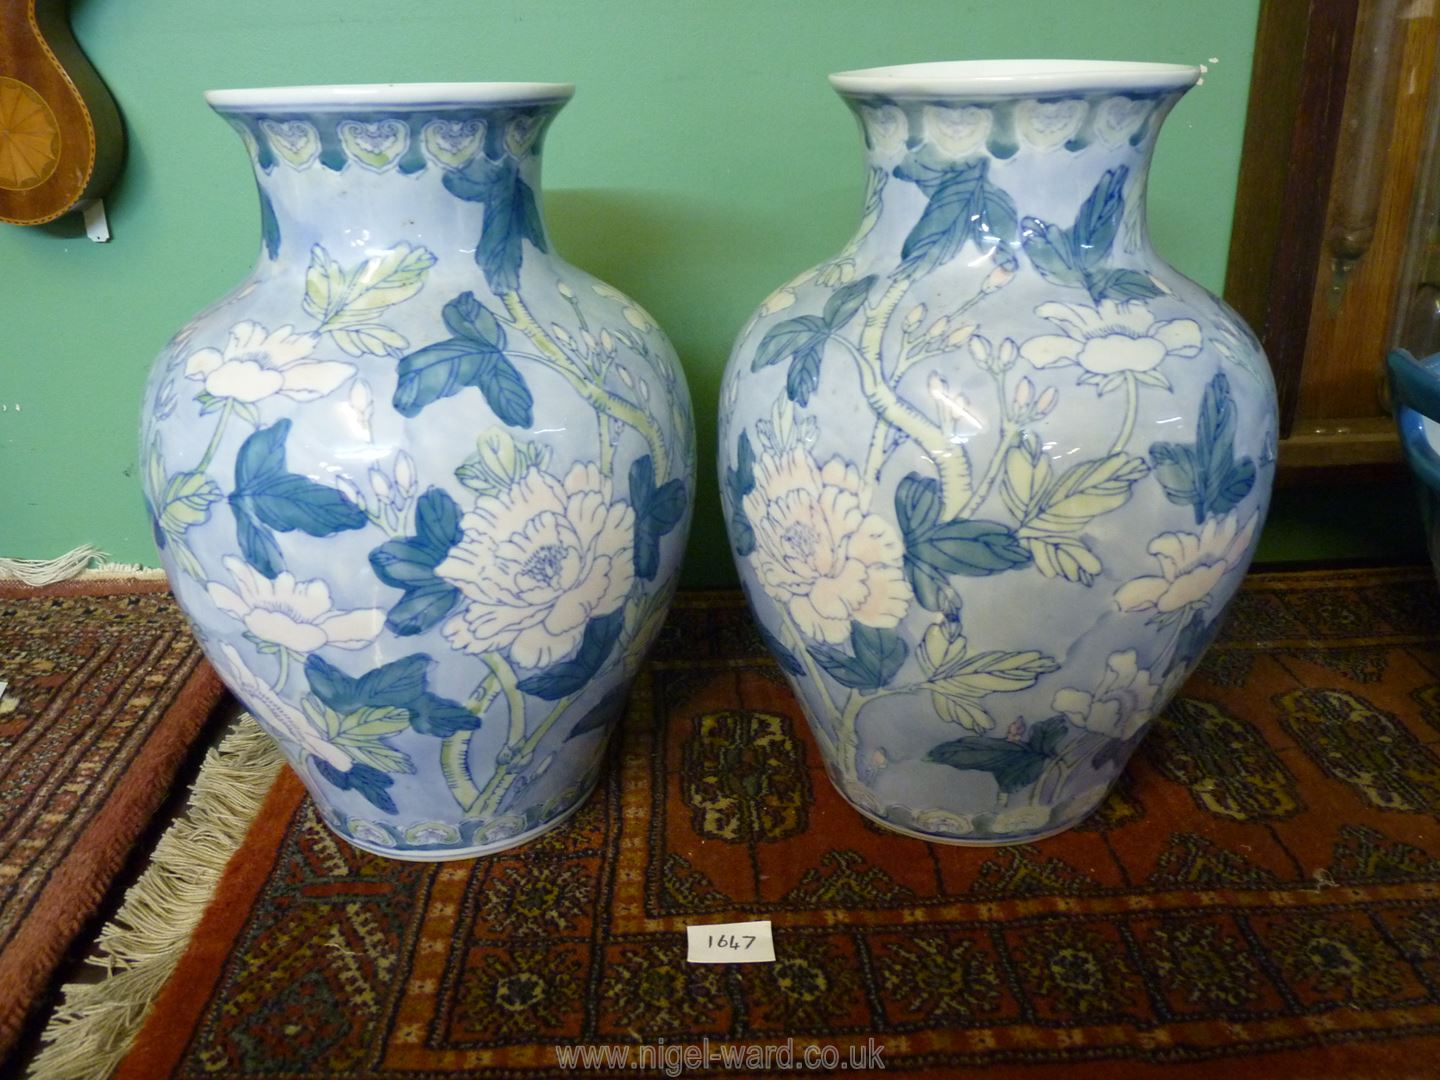 A pair of Satsuma style vases with floral pattern in pale blue and green, 12 1/2'' tall.